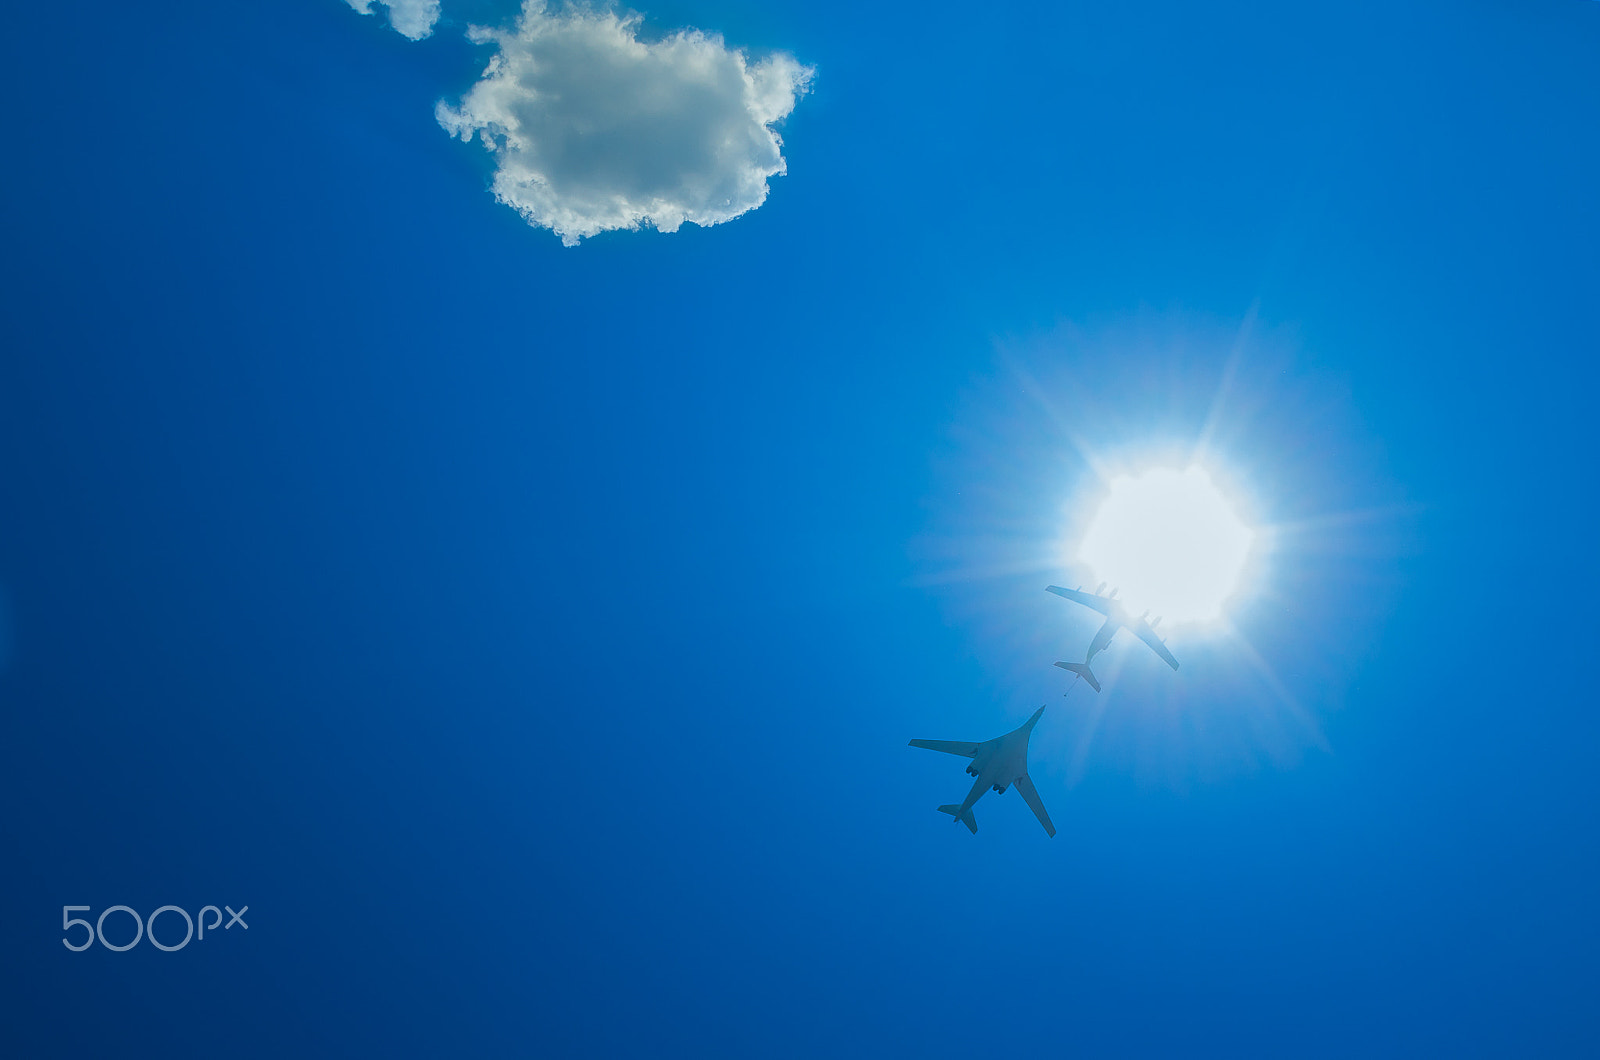 Pentax K-5 II sample photo. Two bombers fly up through the sun photography